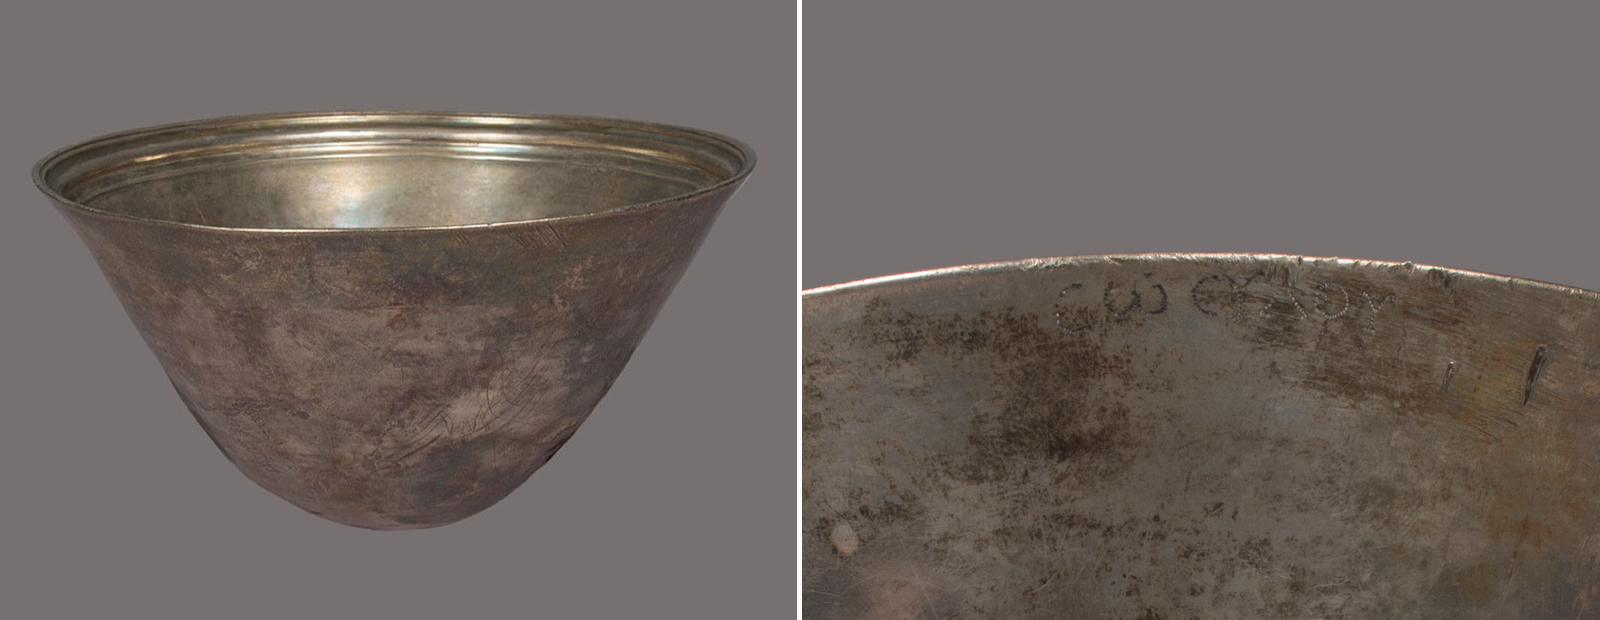 Tarnished silver bowl with engraving